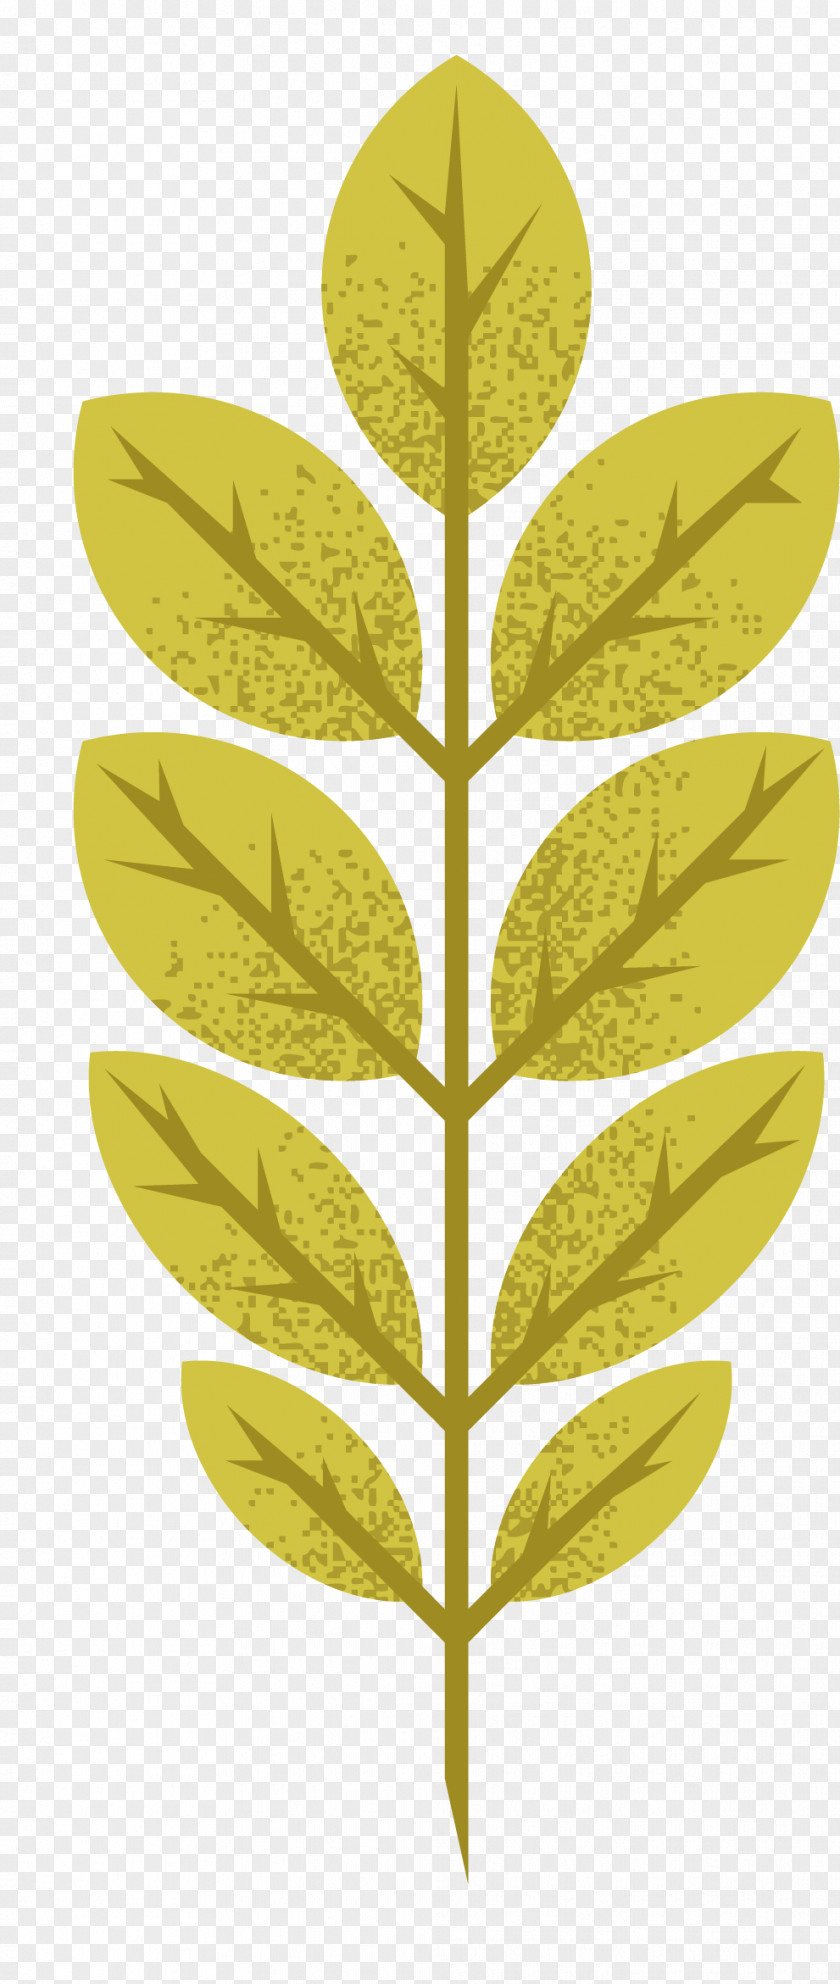 Autumn Leaves Collection Vector Material Maple Leaf PNG